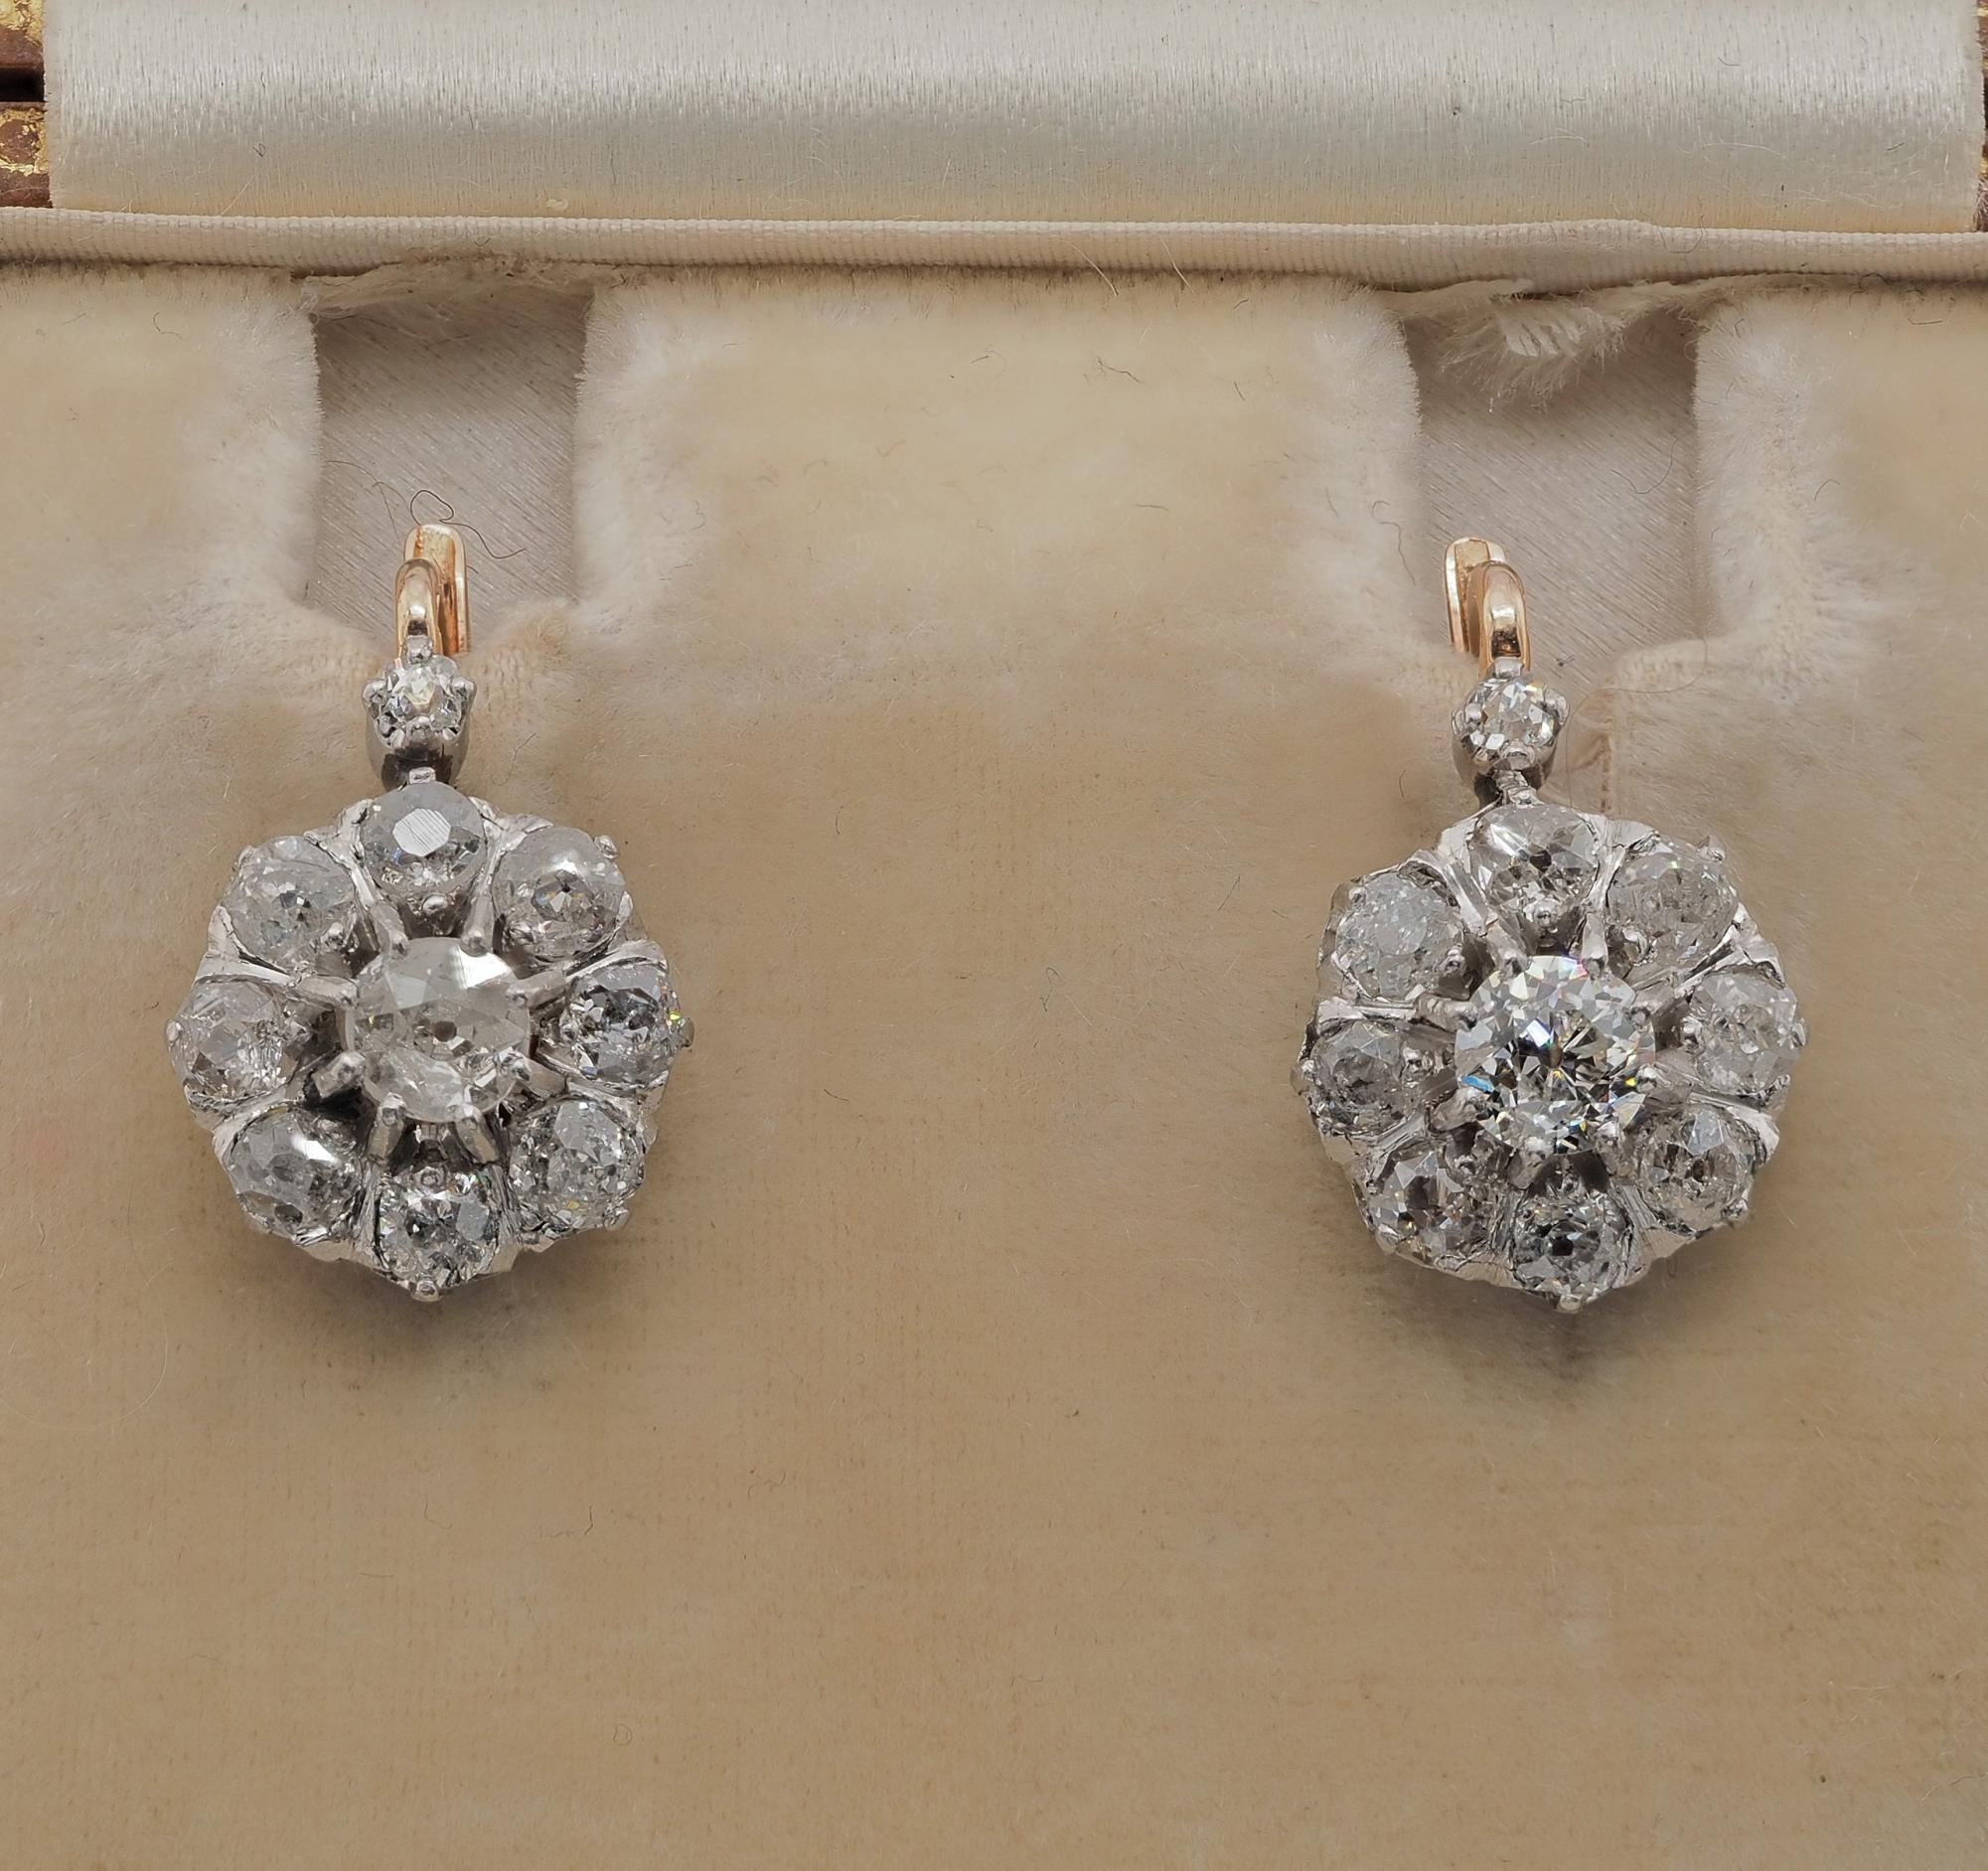 Sweet Sparkly Flowers
Edwardian period, 1900 ca, come these charming and gorgeous cluster earrings
Hand crafted of solid 18 Kt gold Platinum topped, classy antique cluster daisy design totally hand crafted during the time
Each sweet flower is topped